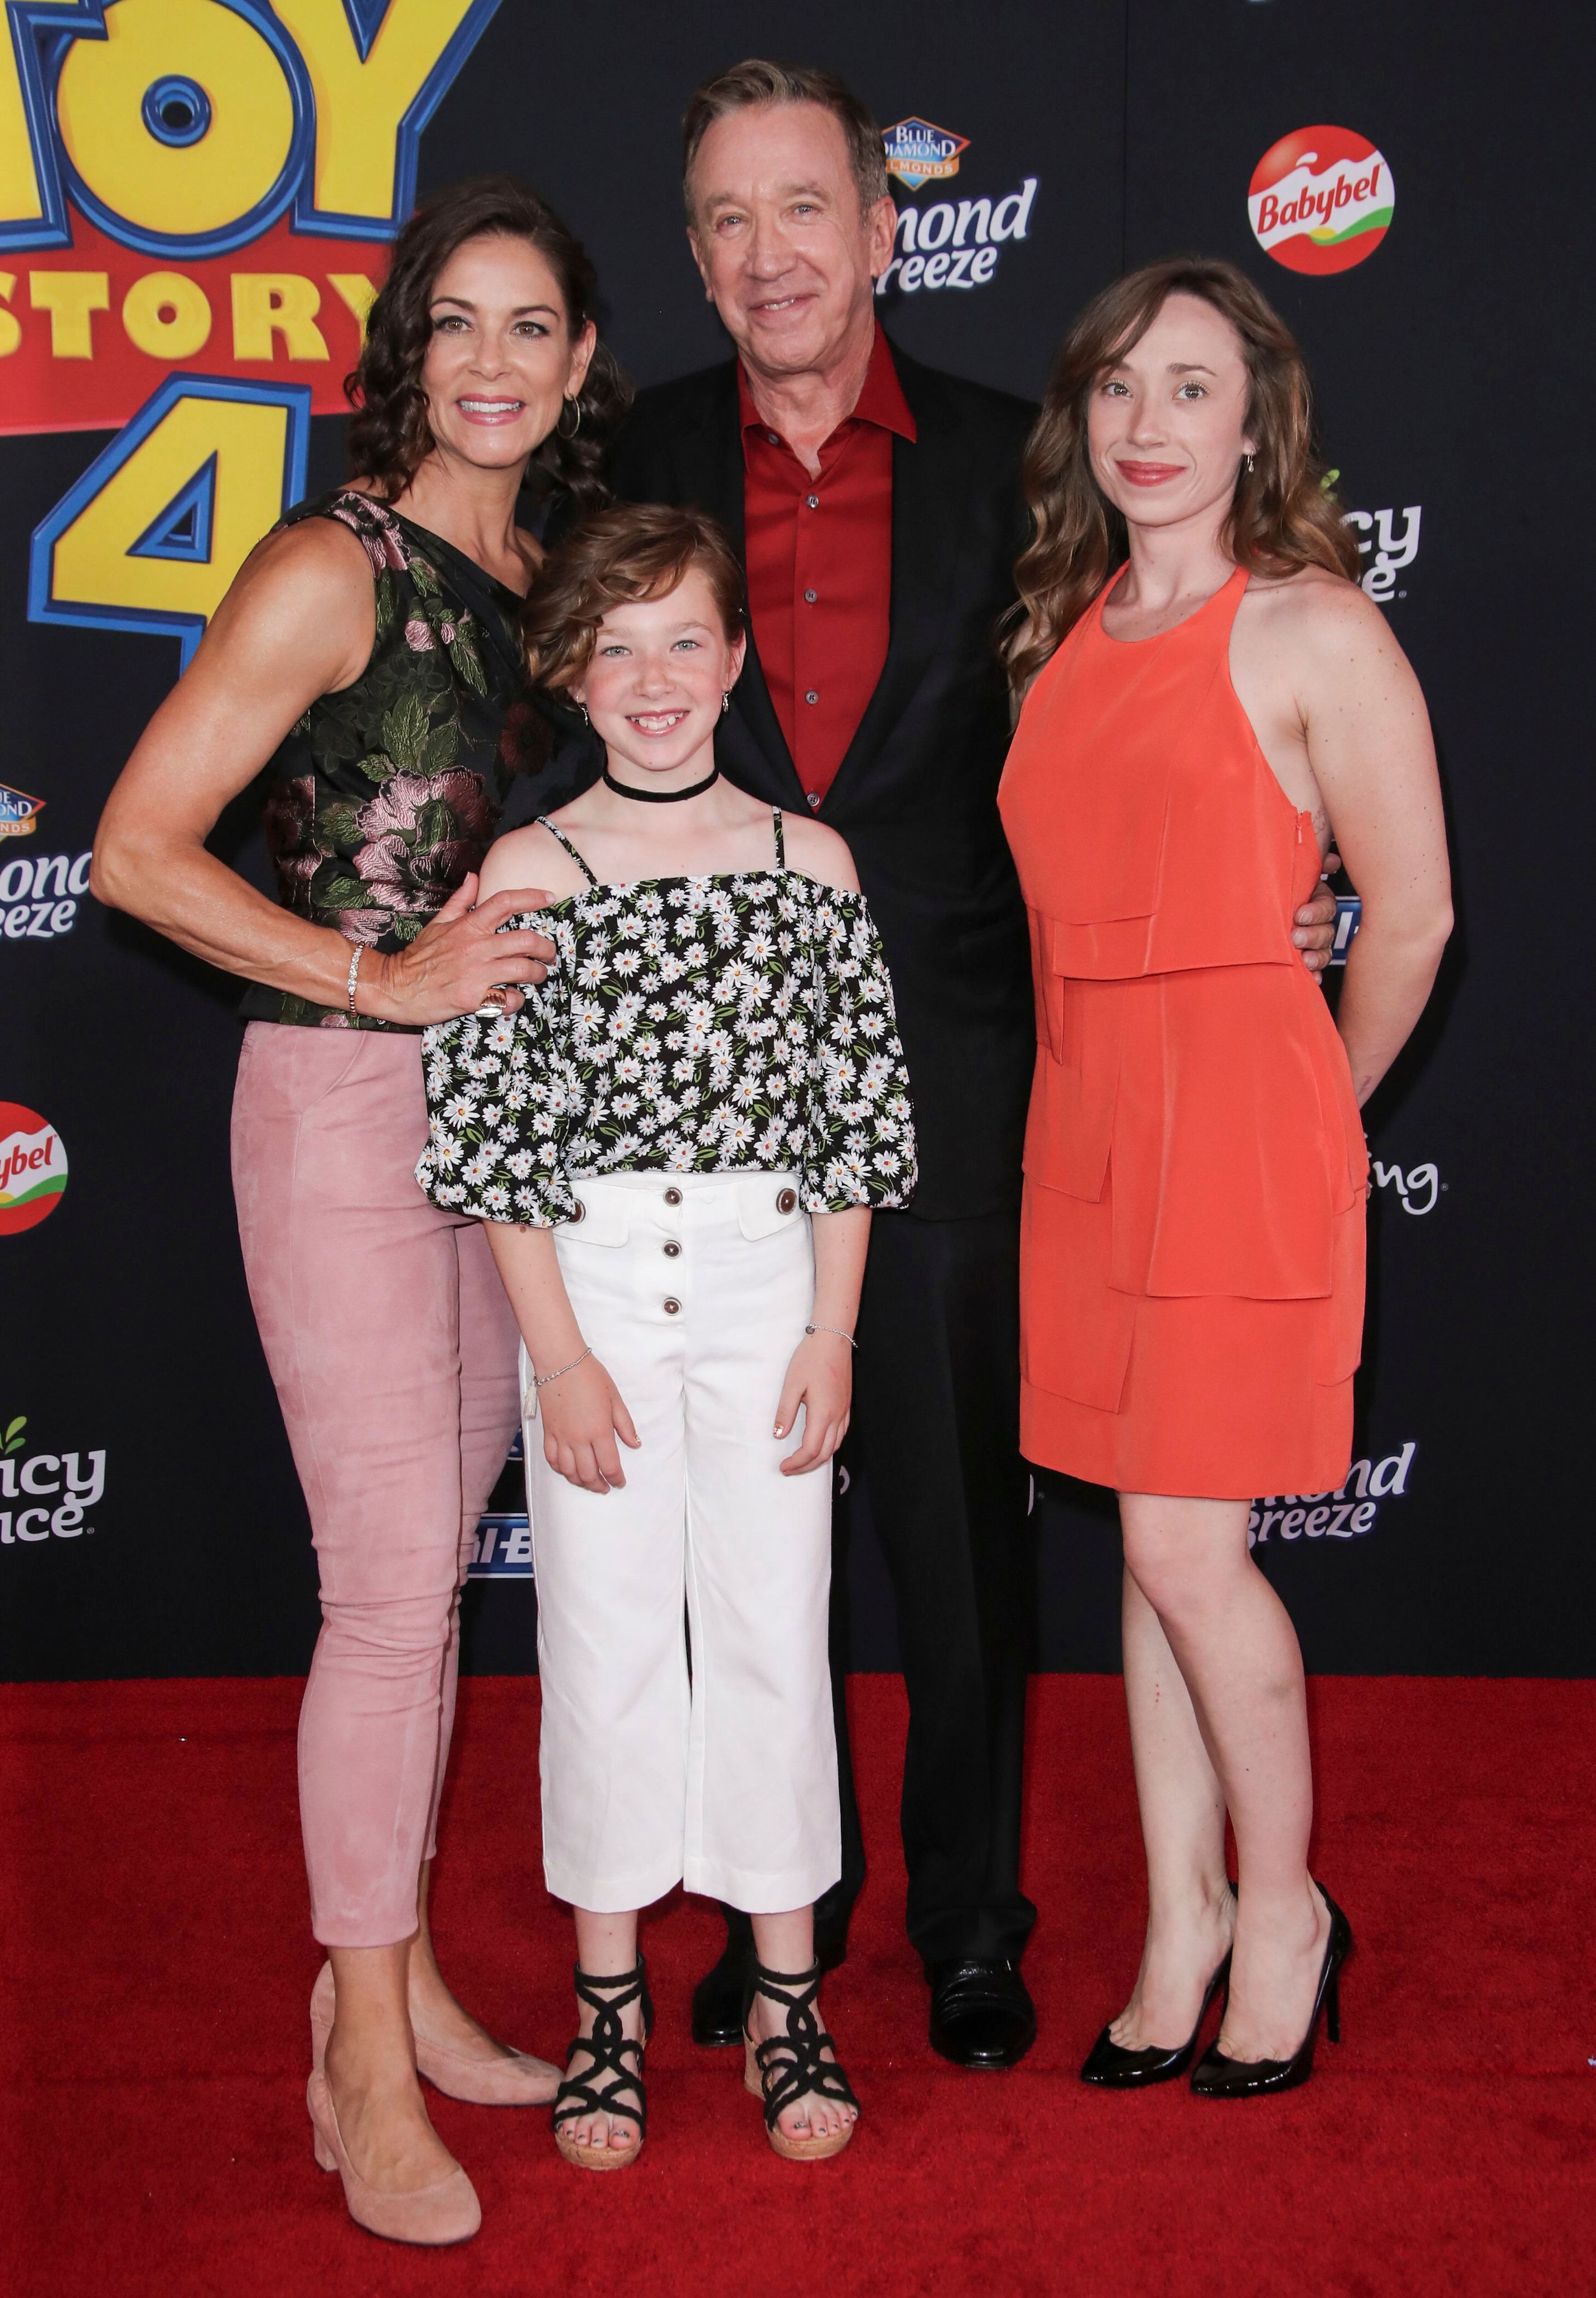 <p>Tim Allen brought eldest daughter Katherine -- who's now an adult -- as well as second wife Jane Hajduk and their daughter, Elizabeth (who was born in 2009), to the premiere of his film "Toy Story 4" in Hollywood on June 11, 2019. There, Katherine (who was born in 1989) told People magazine that her dad, who plays Buzz Lightyear in the animated Disney franchise, has been a toy since she was 6!</p>